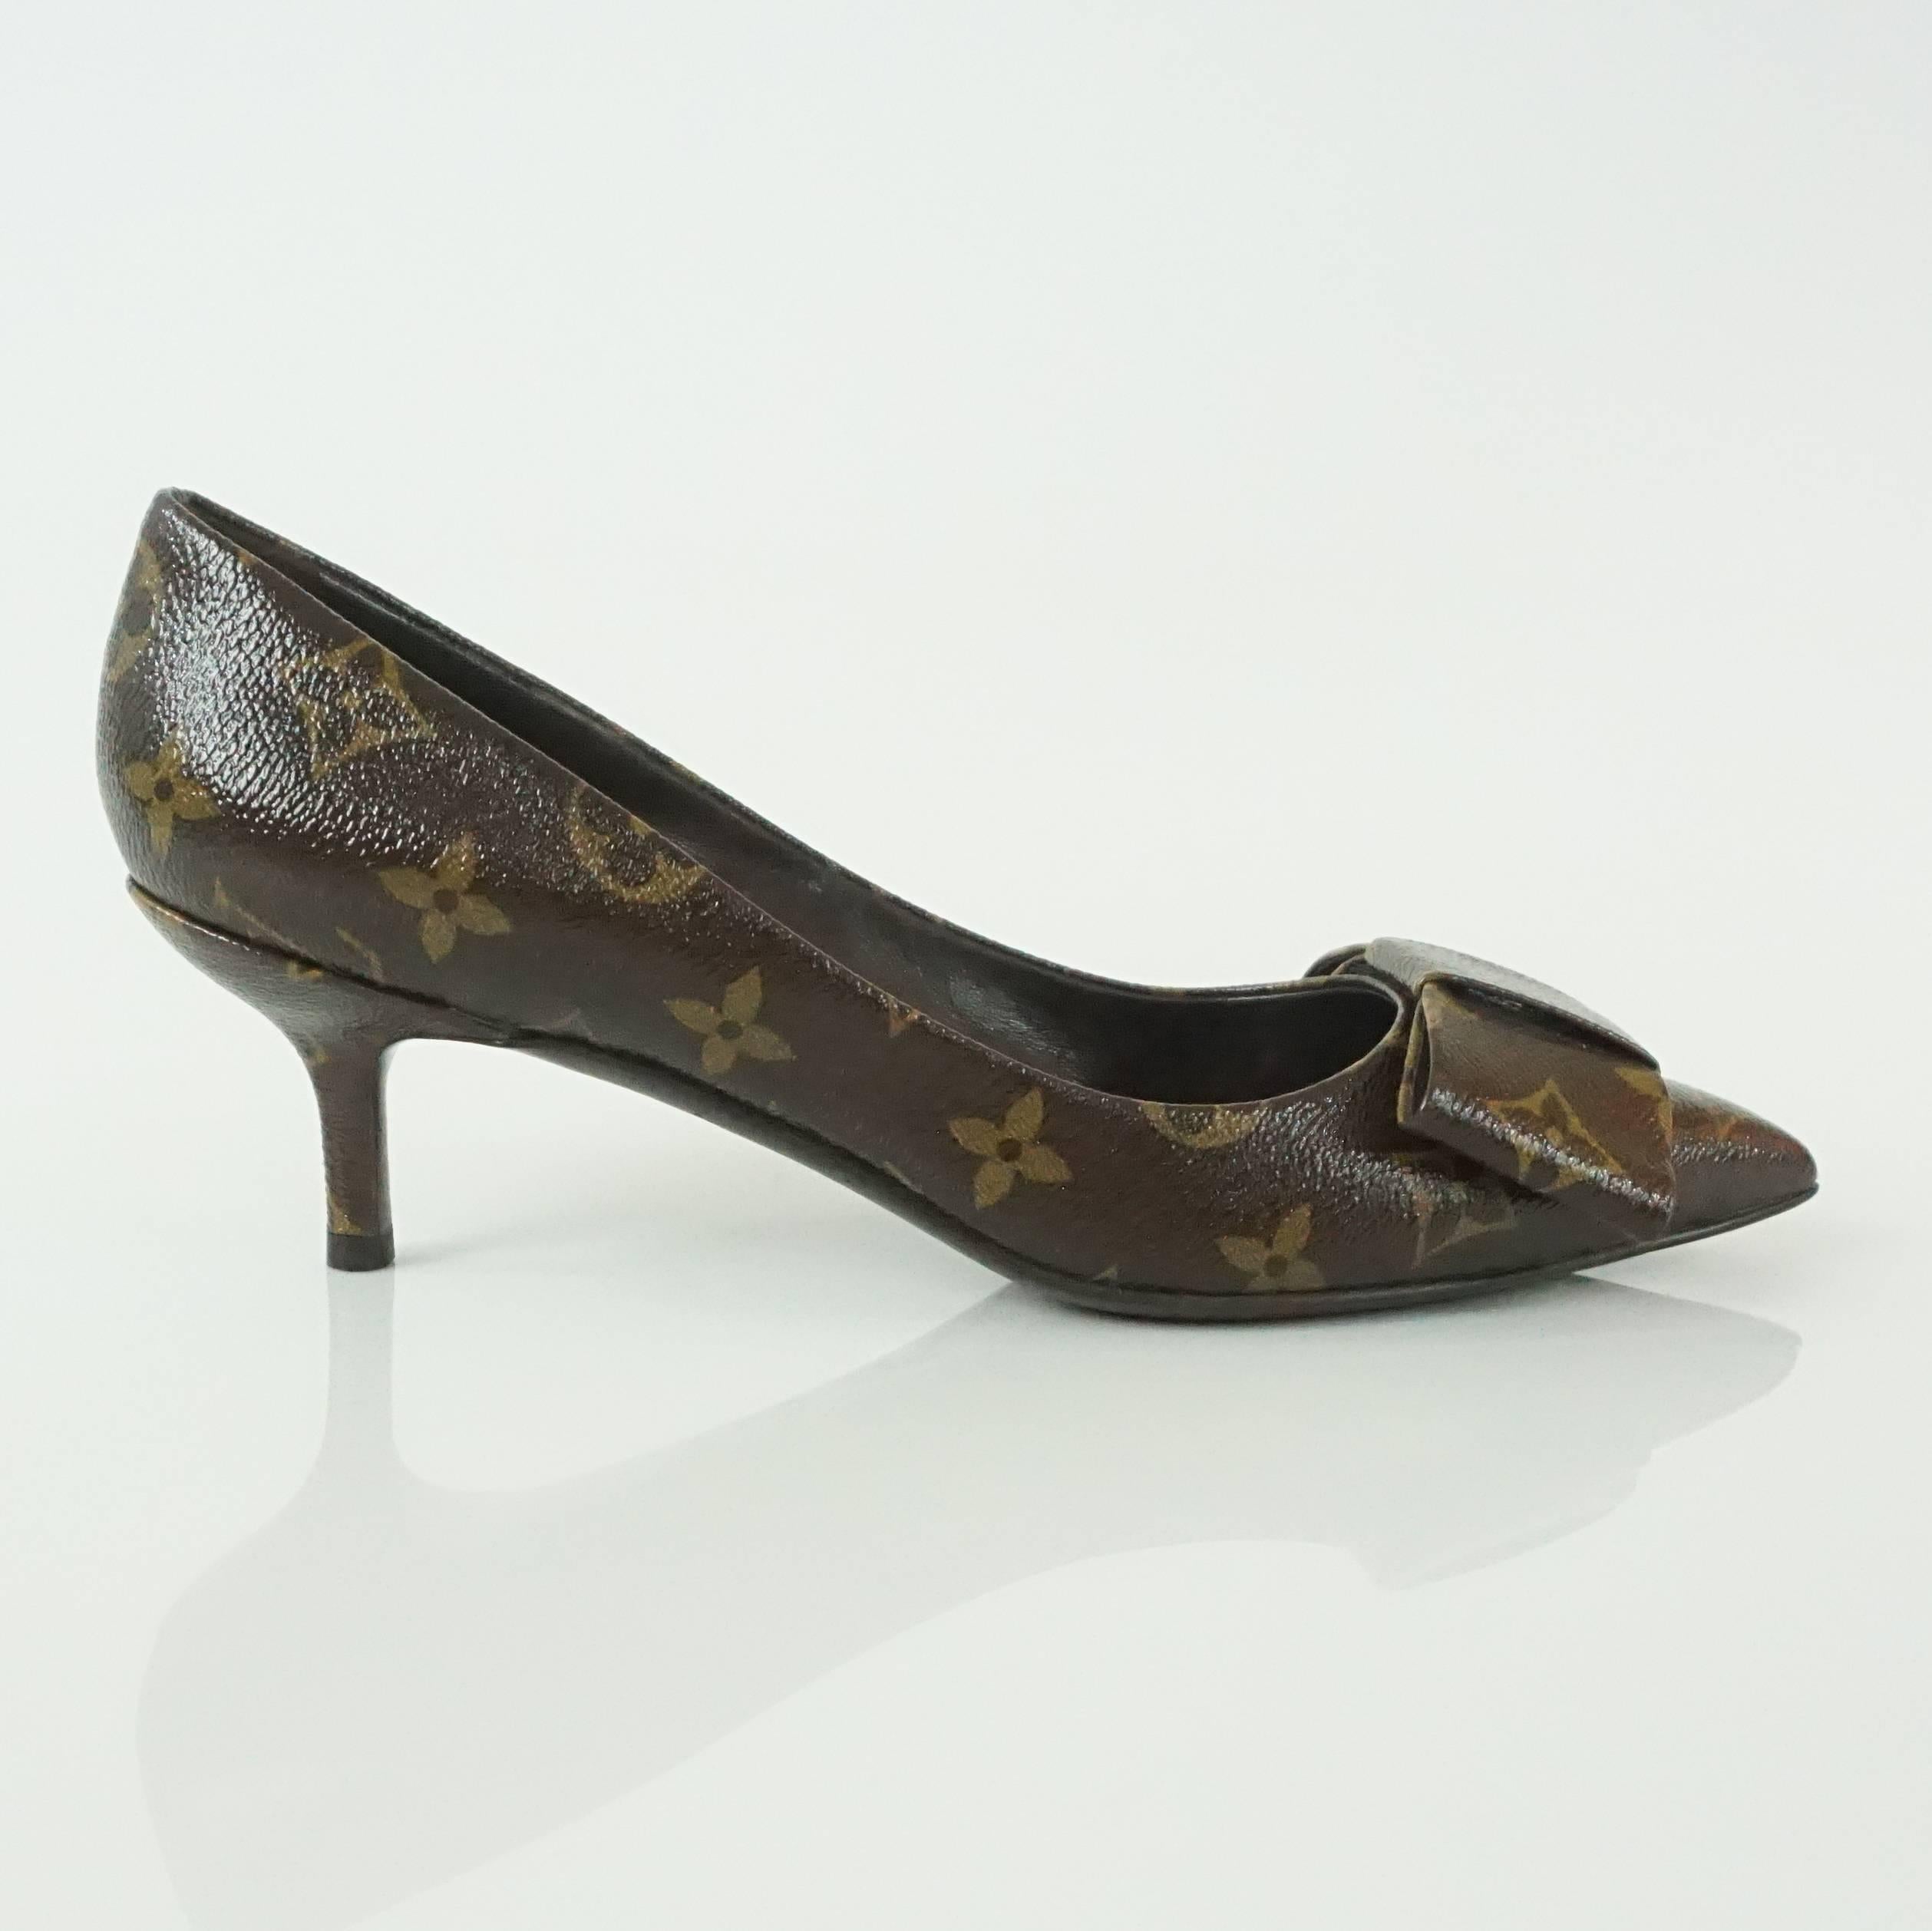 These Louis Vuitton brown monogram heels are pointed toe with a low heel. They are in excellent condition with minimal wear on the bottom. The only issue is that the heels tap on one shoe is on sideways. The heels also come with a duster. 

Heel: